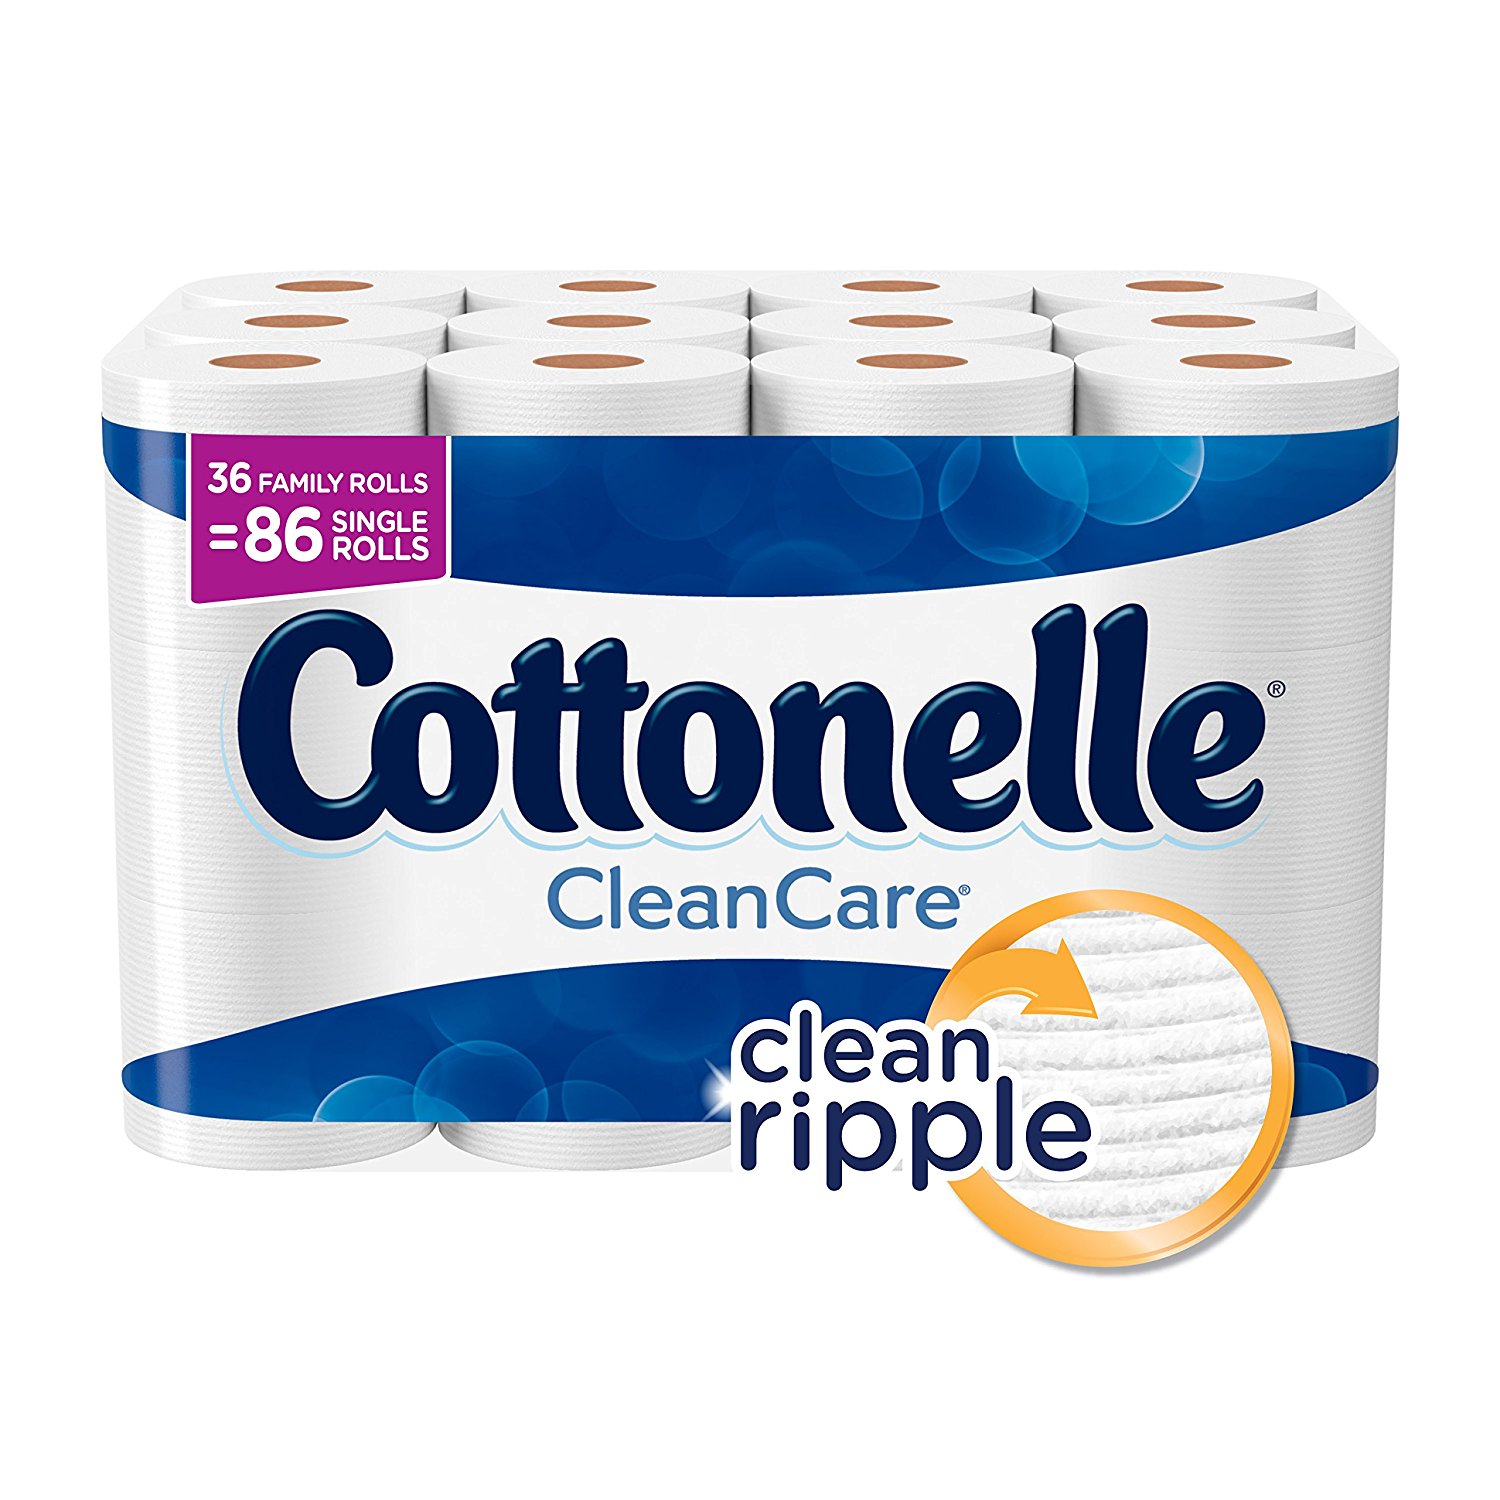 Cottonelle CleanCare Family Roll Toilet Paper Only $19.99 Shipped! Only $.23 Per Regular Roll!